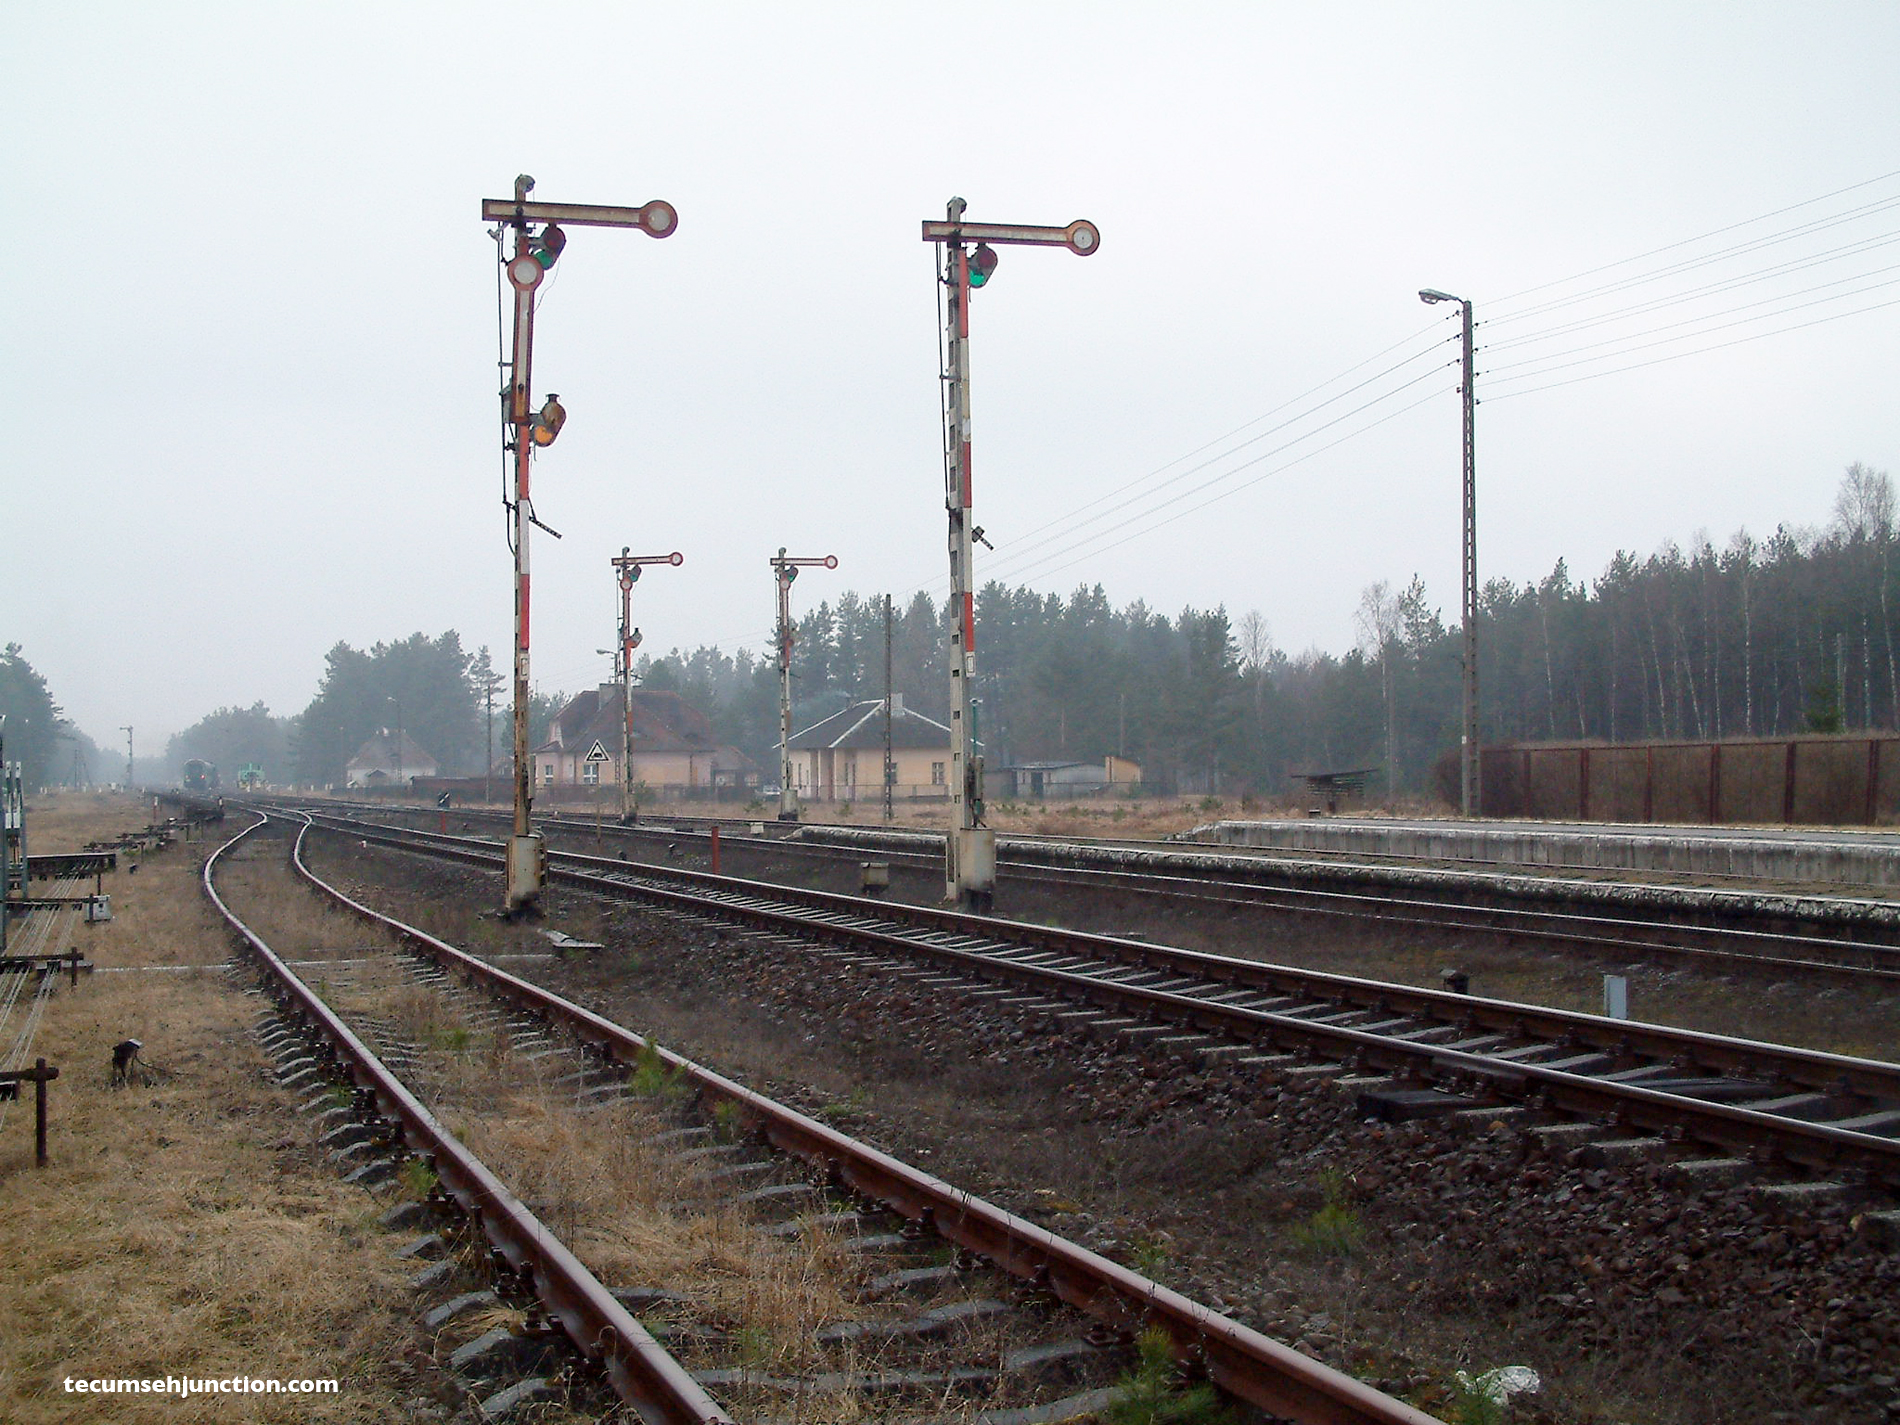 Semaphore signalling at the south end of Bąk.